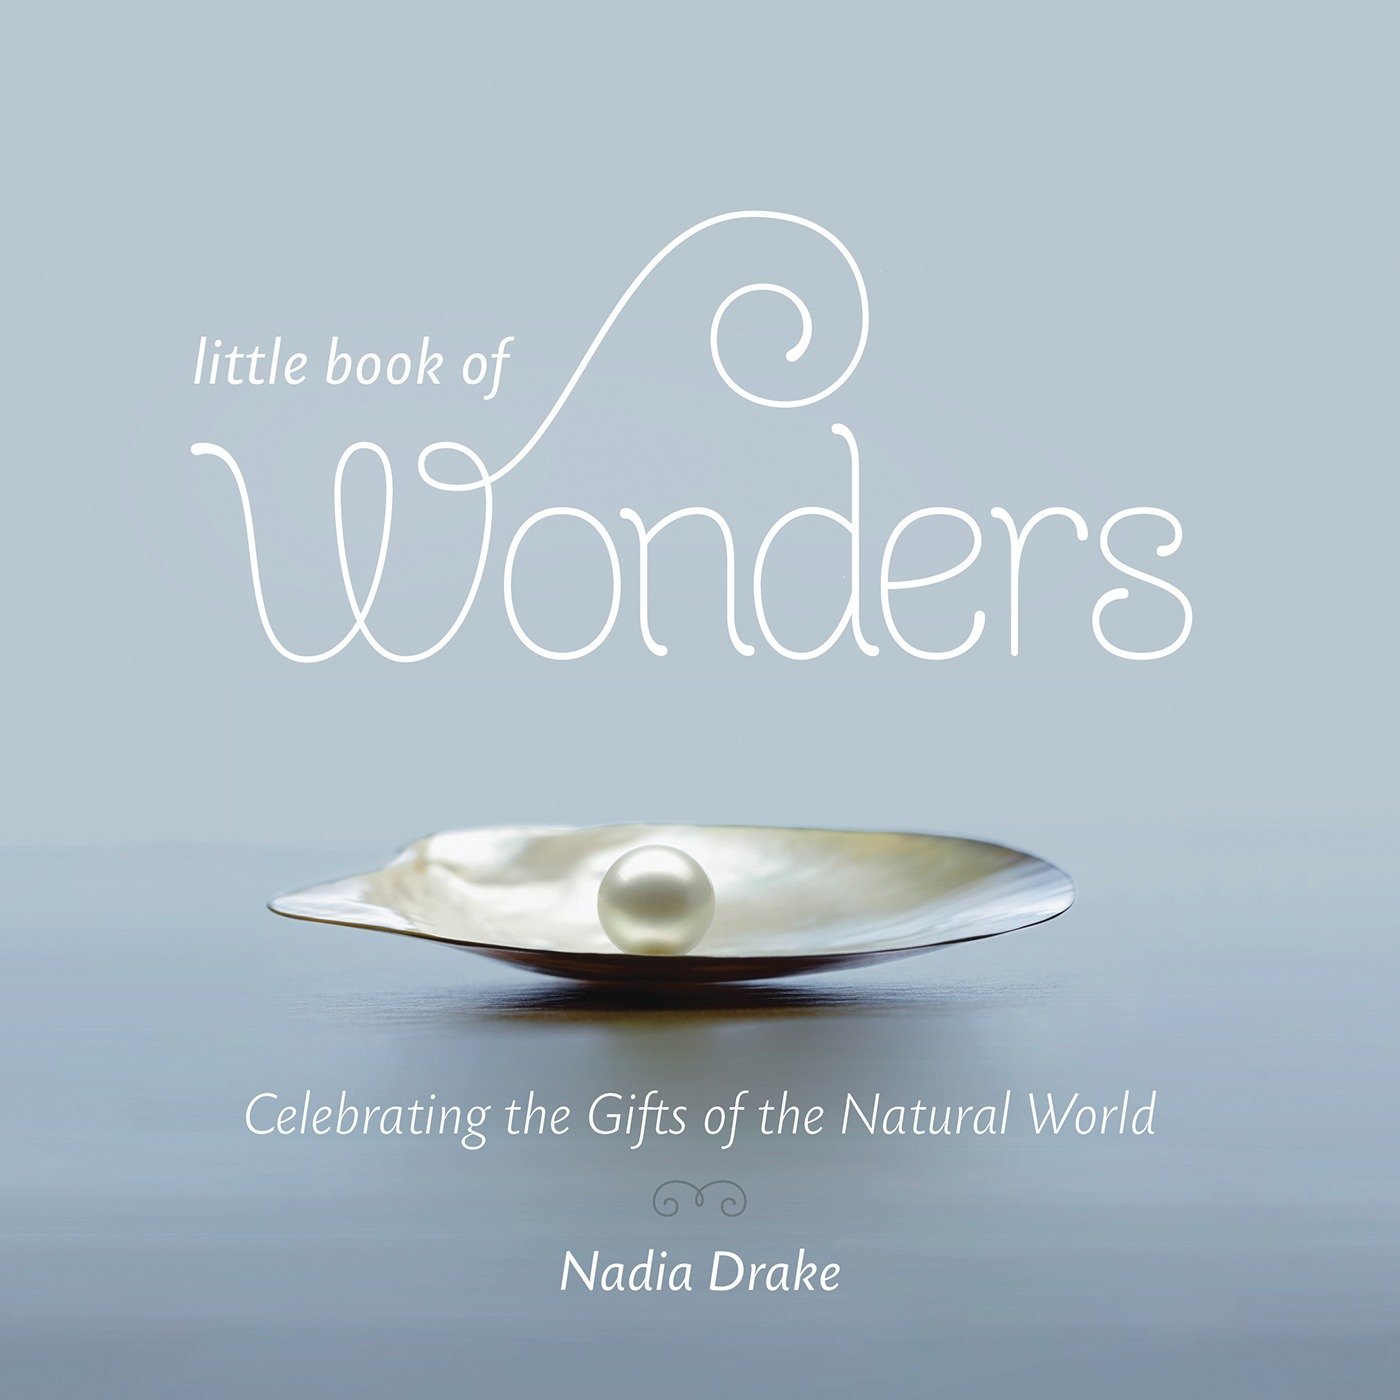 World　Celebrating　Little　Wonders:　Book　by　of　the　the　Gifts　of　Natural　Nadia　Drake